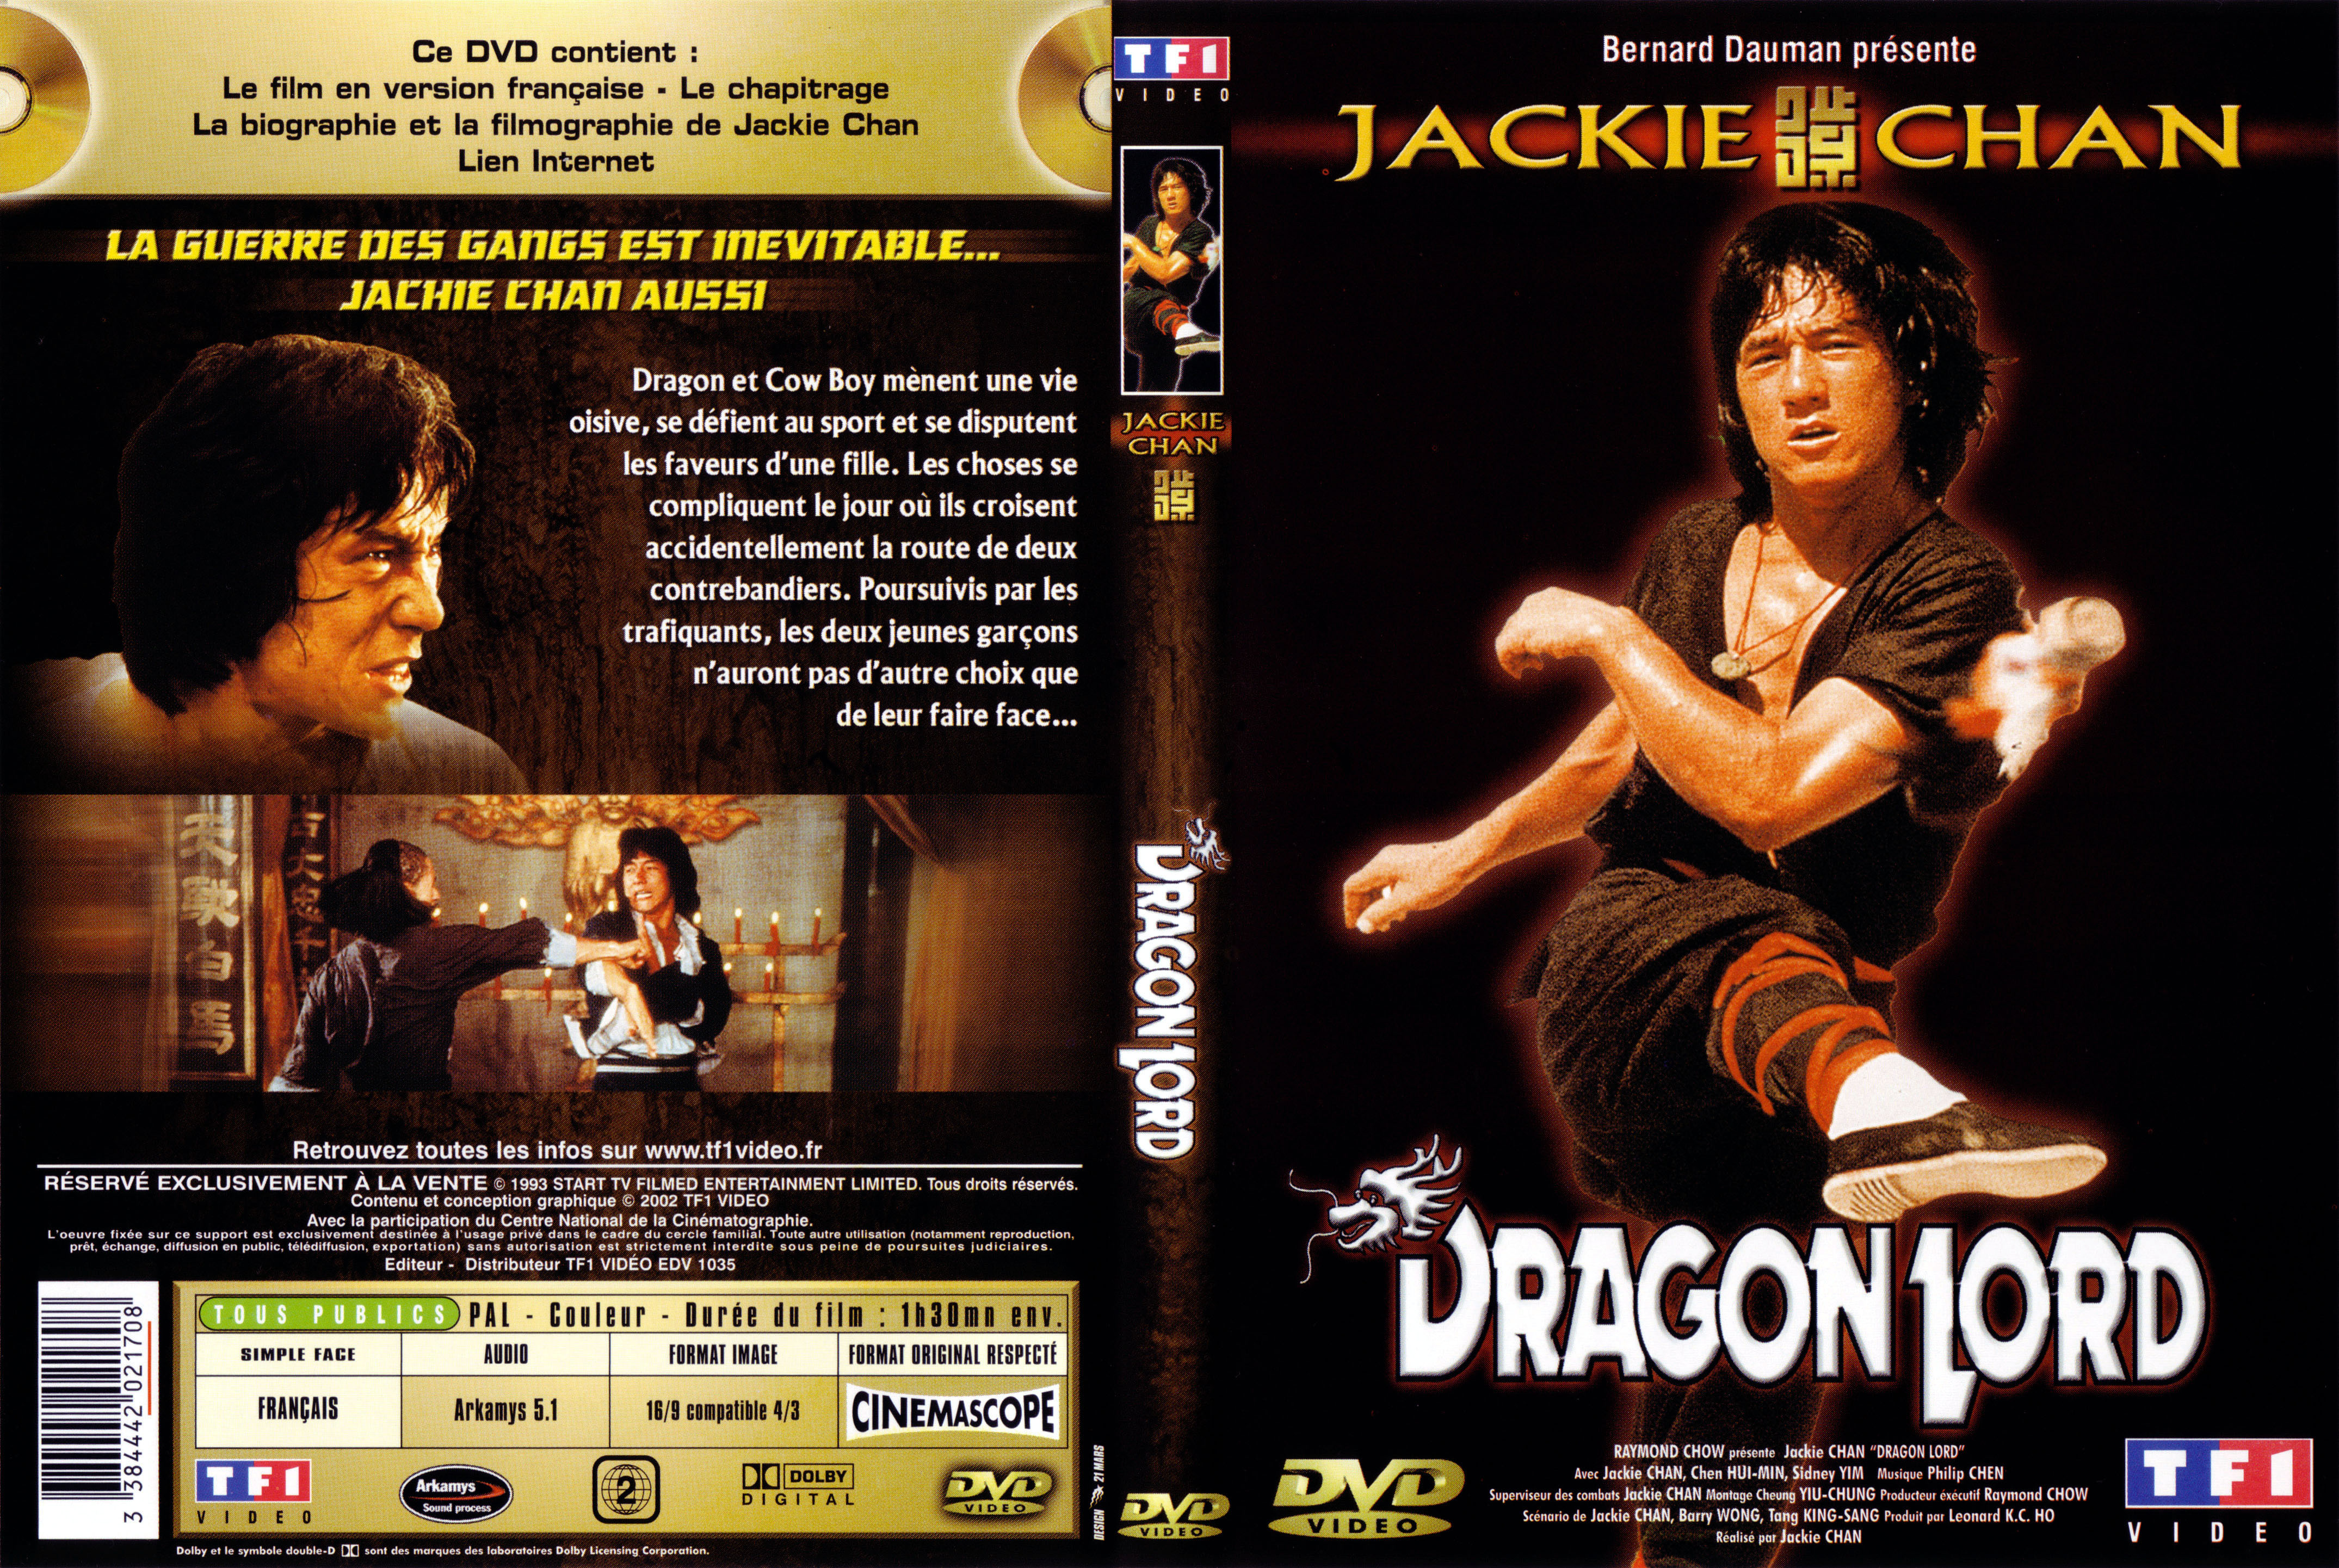 Jaquette DVD Dragon lord